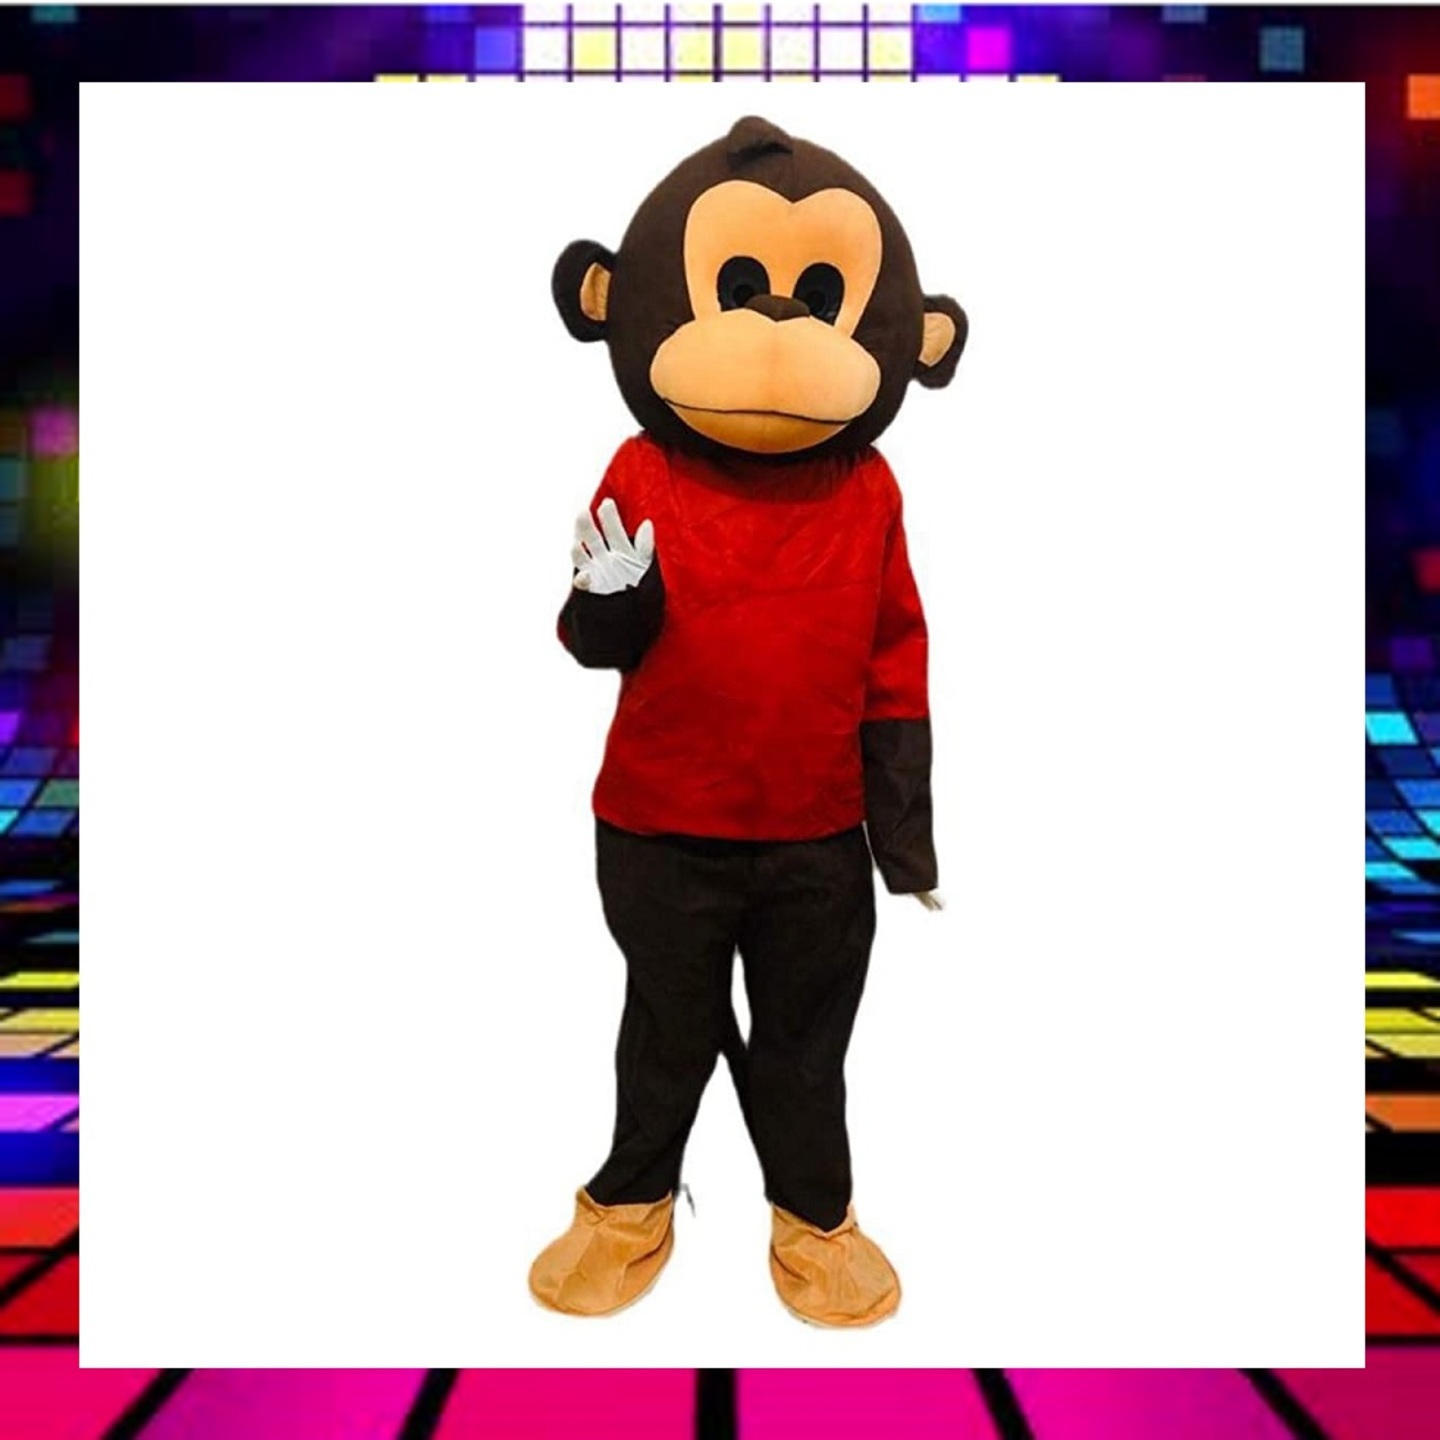 Rental: Monkey Mascot for Kids Party and Events